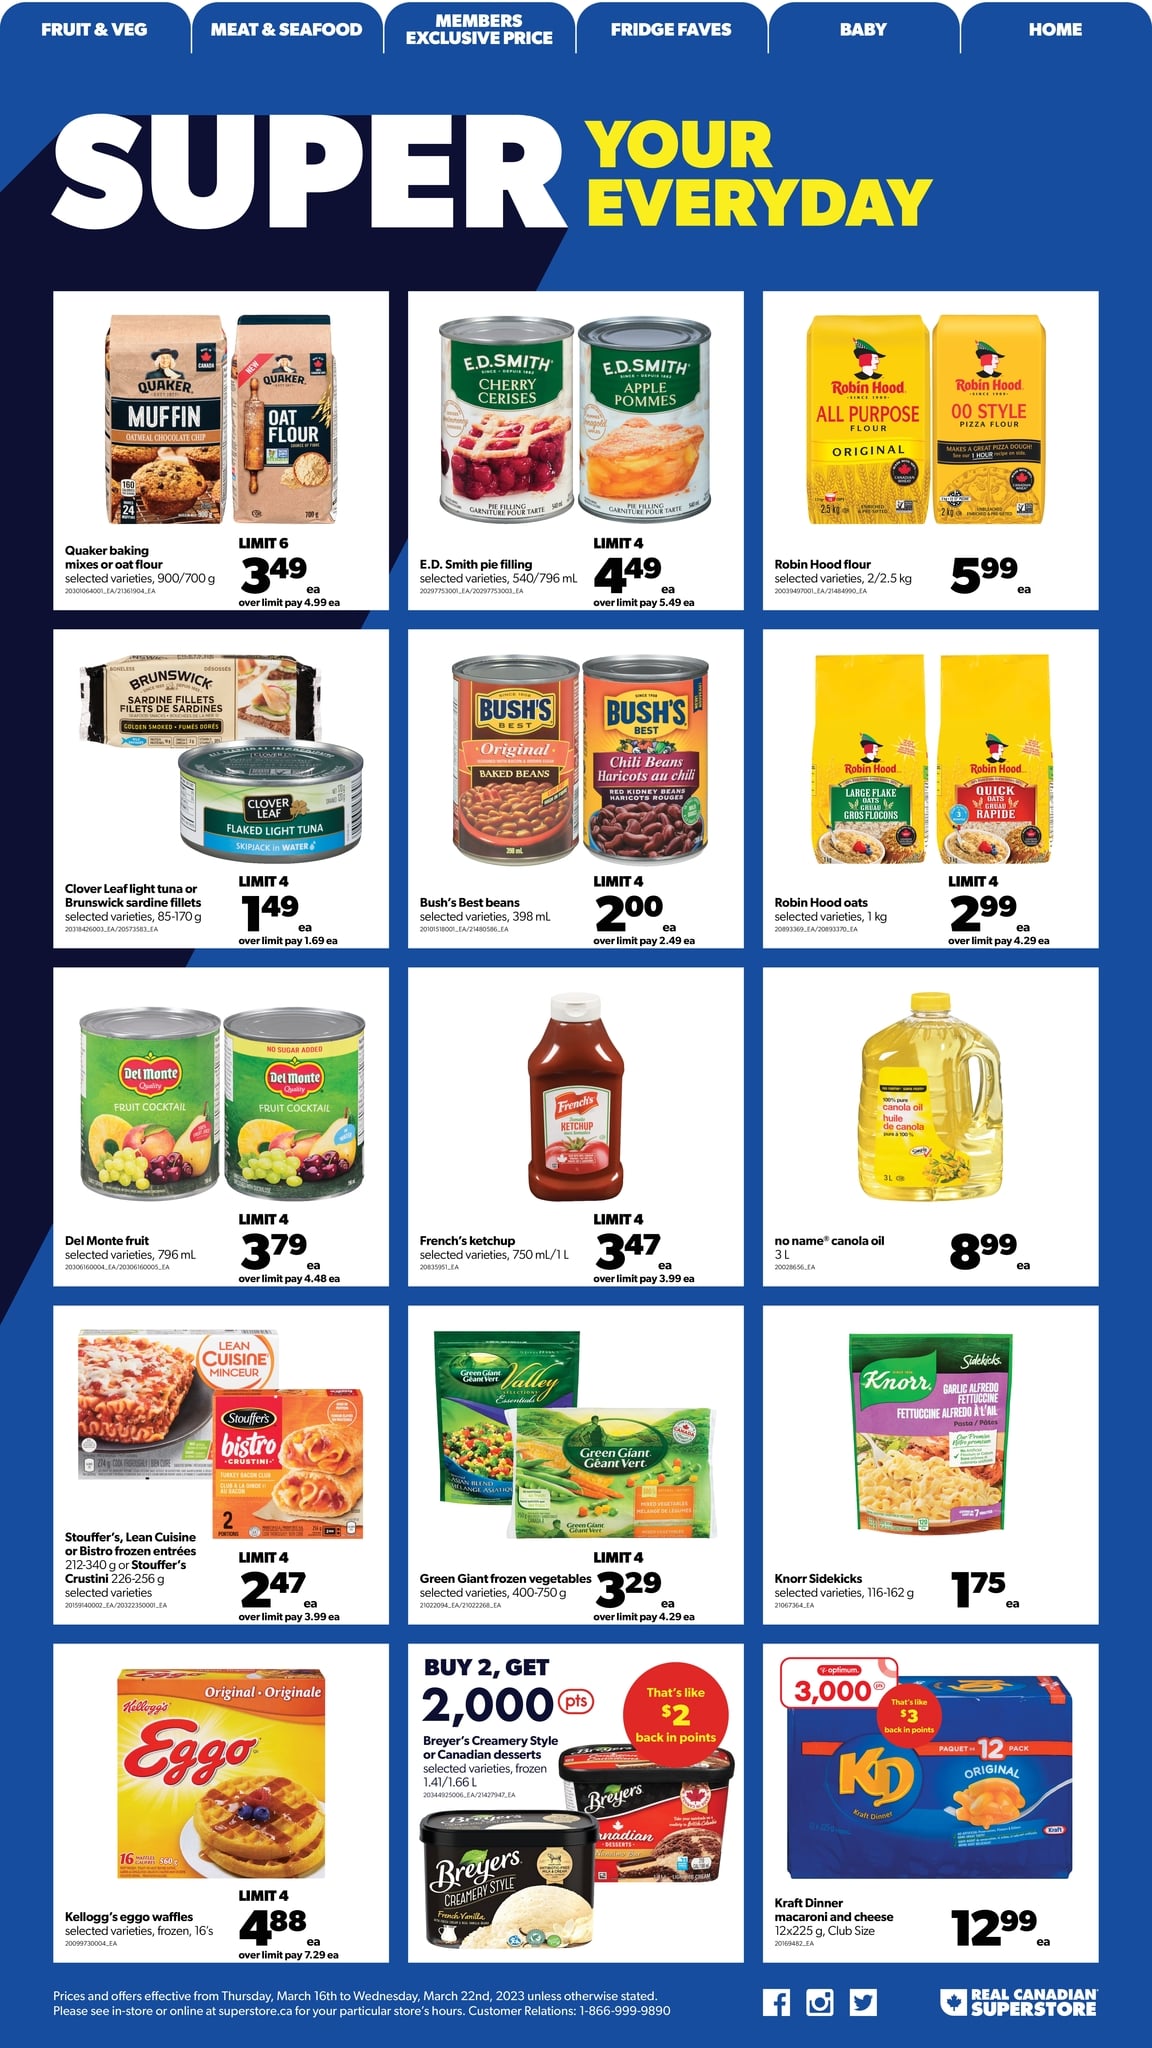 Real Canadian Superstore - Western Canada - Weekly Flyer Specials - Page 10